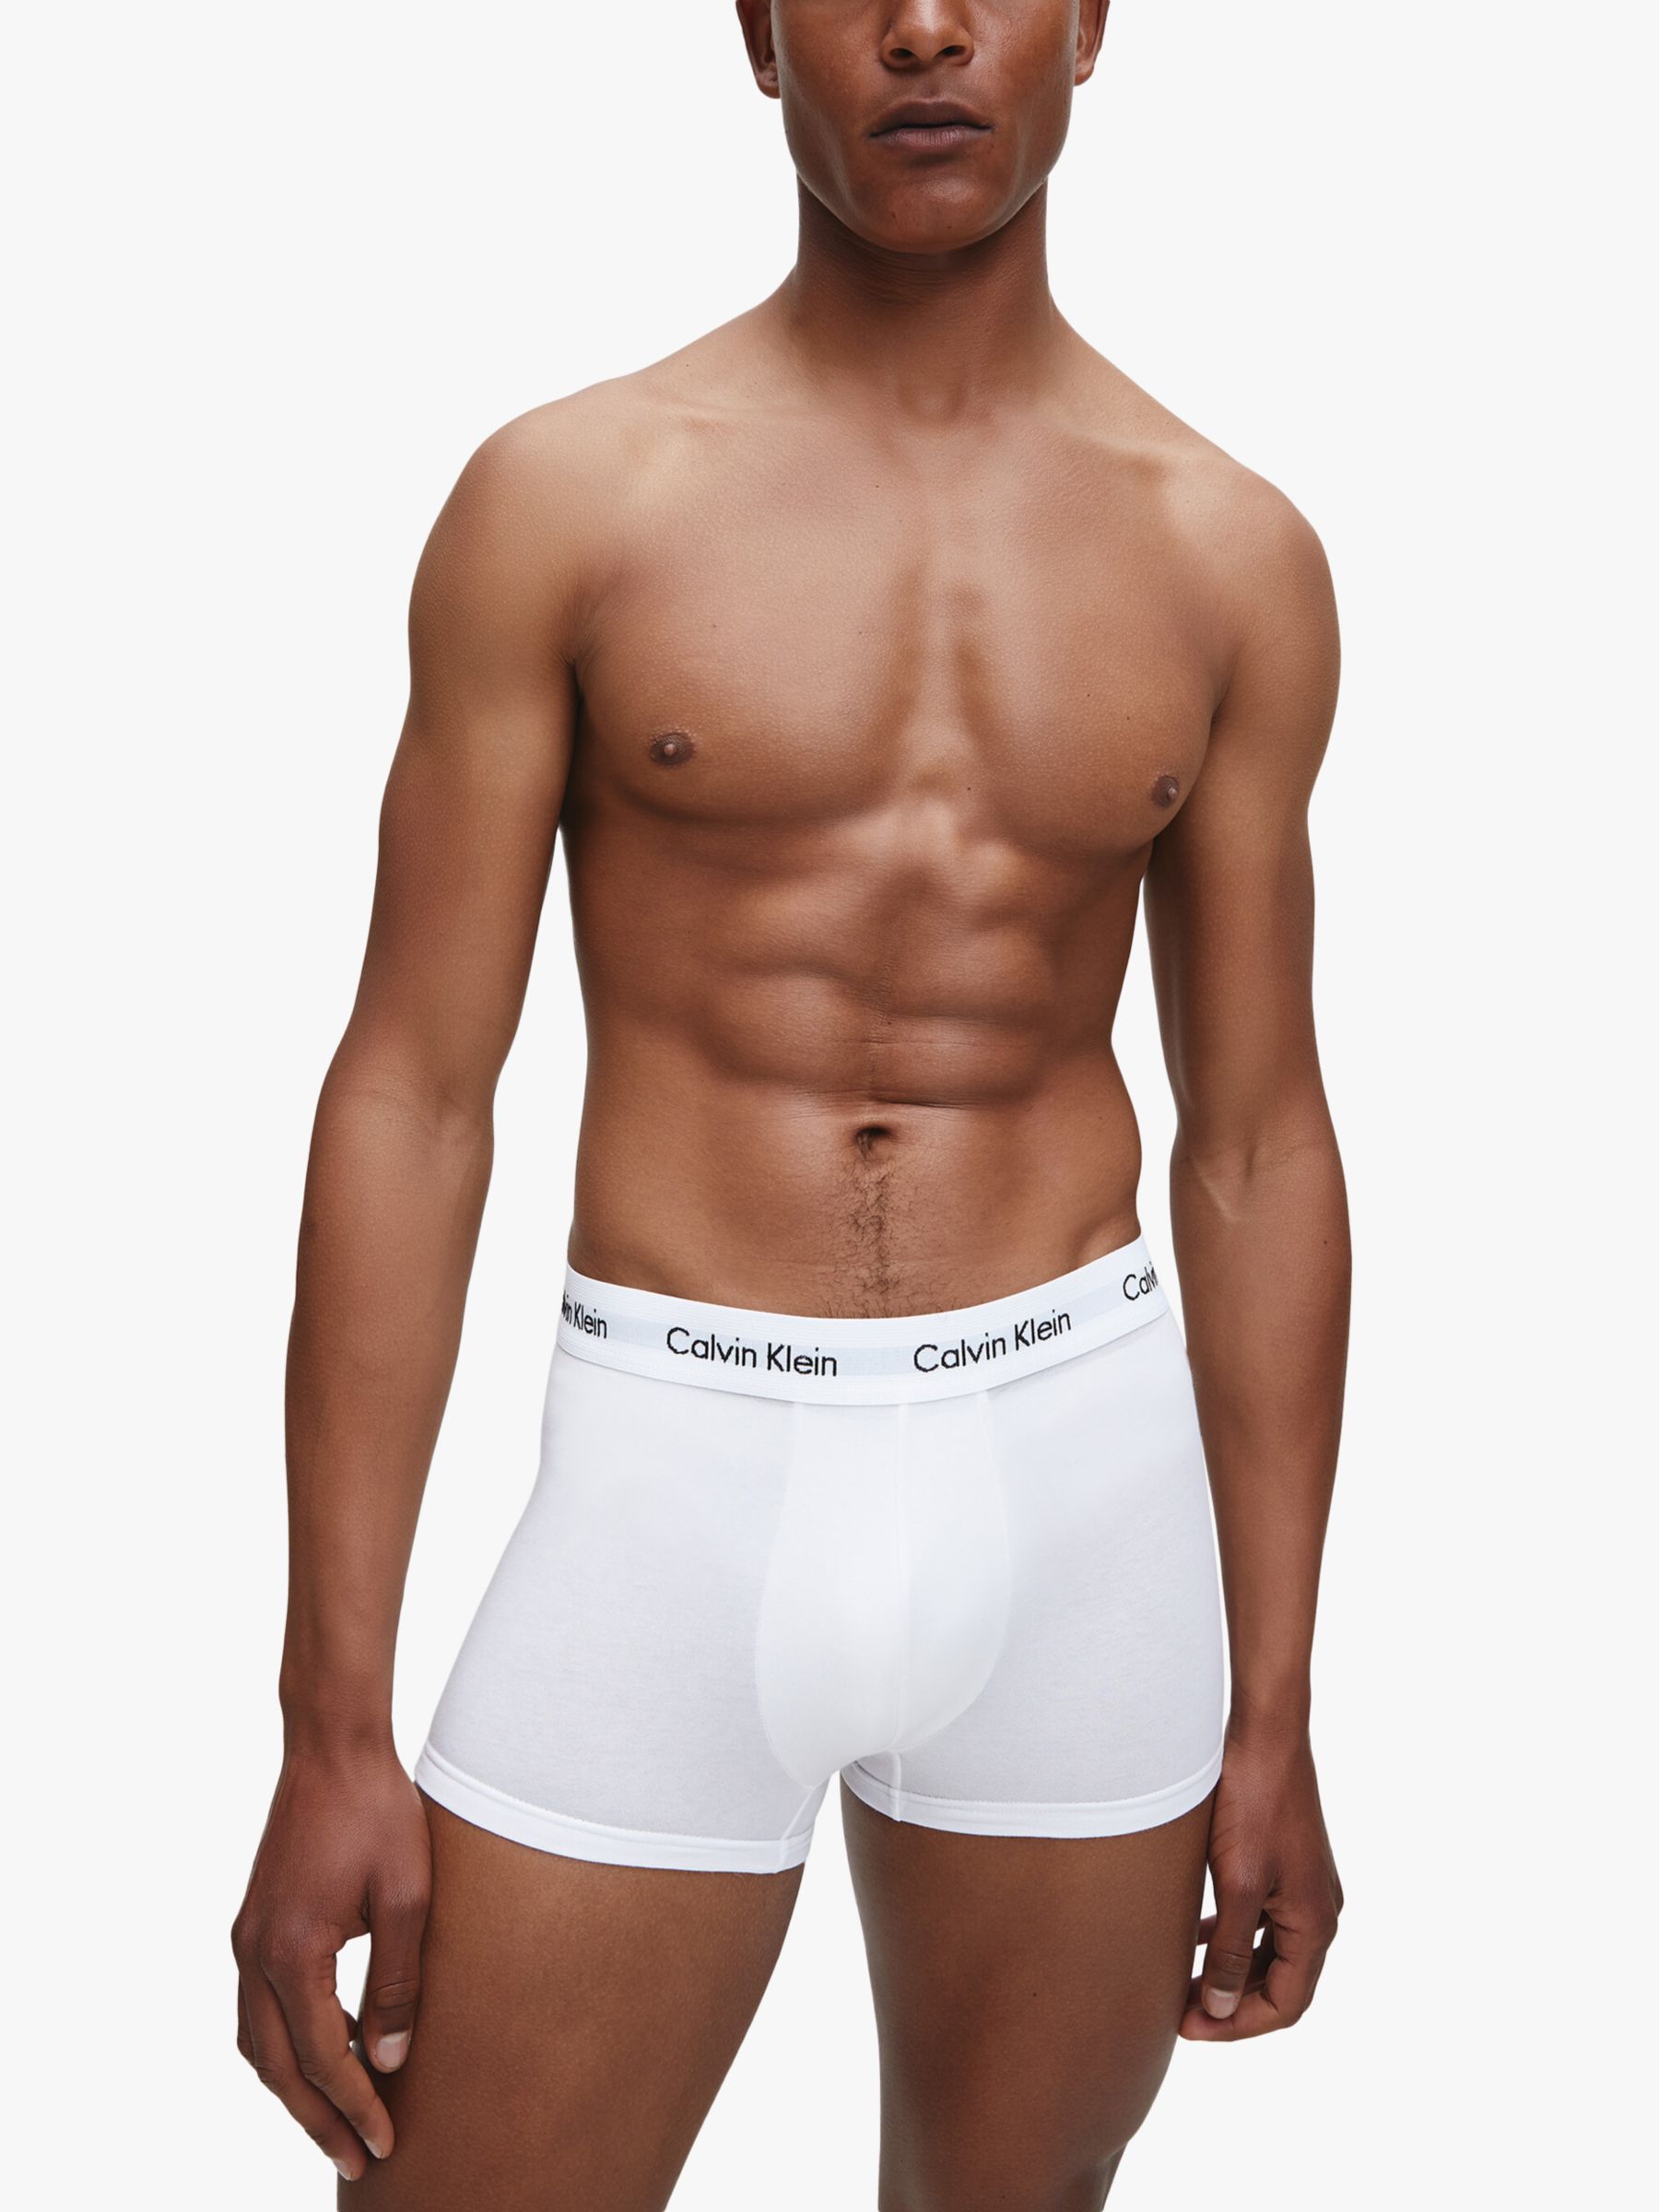 Calvin Klein Low Rise Cotton Stretch Trunks, Pack of 3, Red  Ginger/White/Pyro Blue at John Lewis & Partners